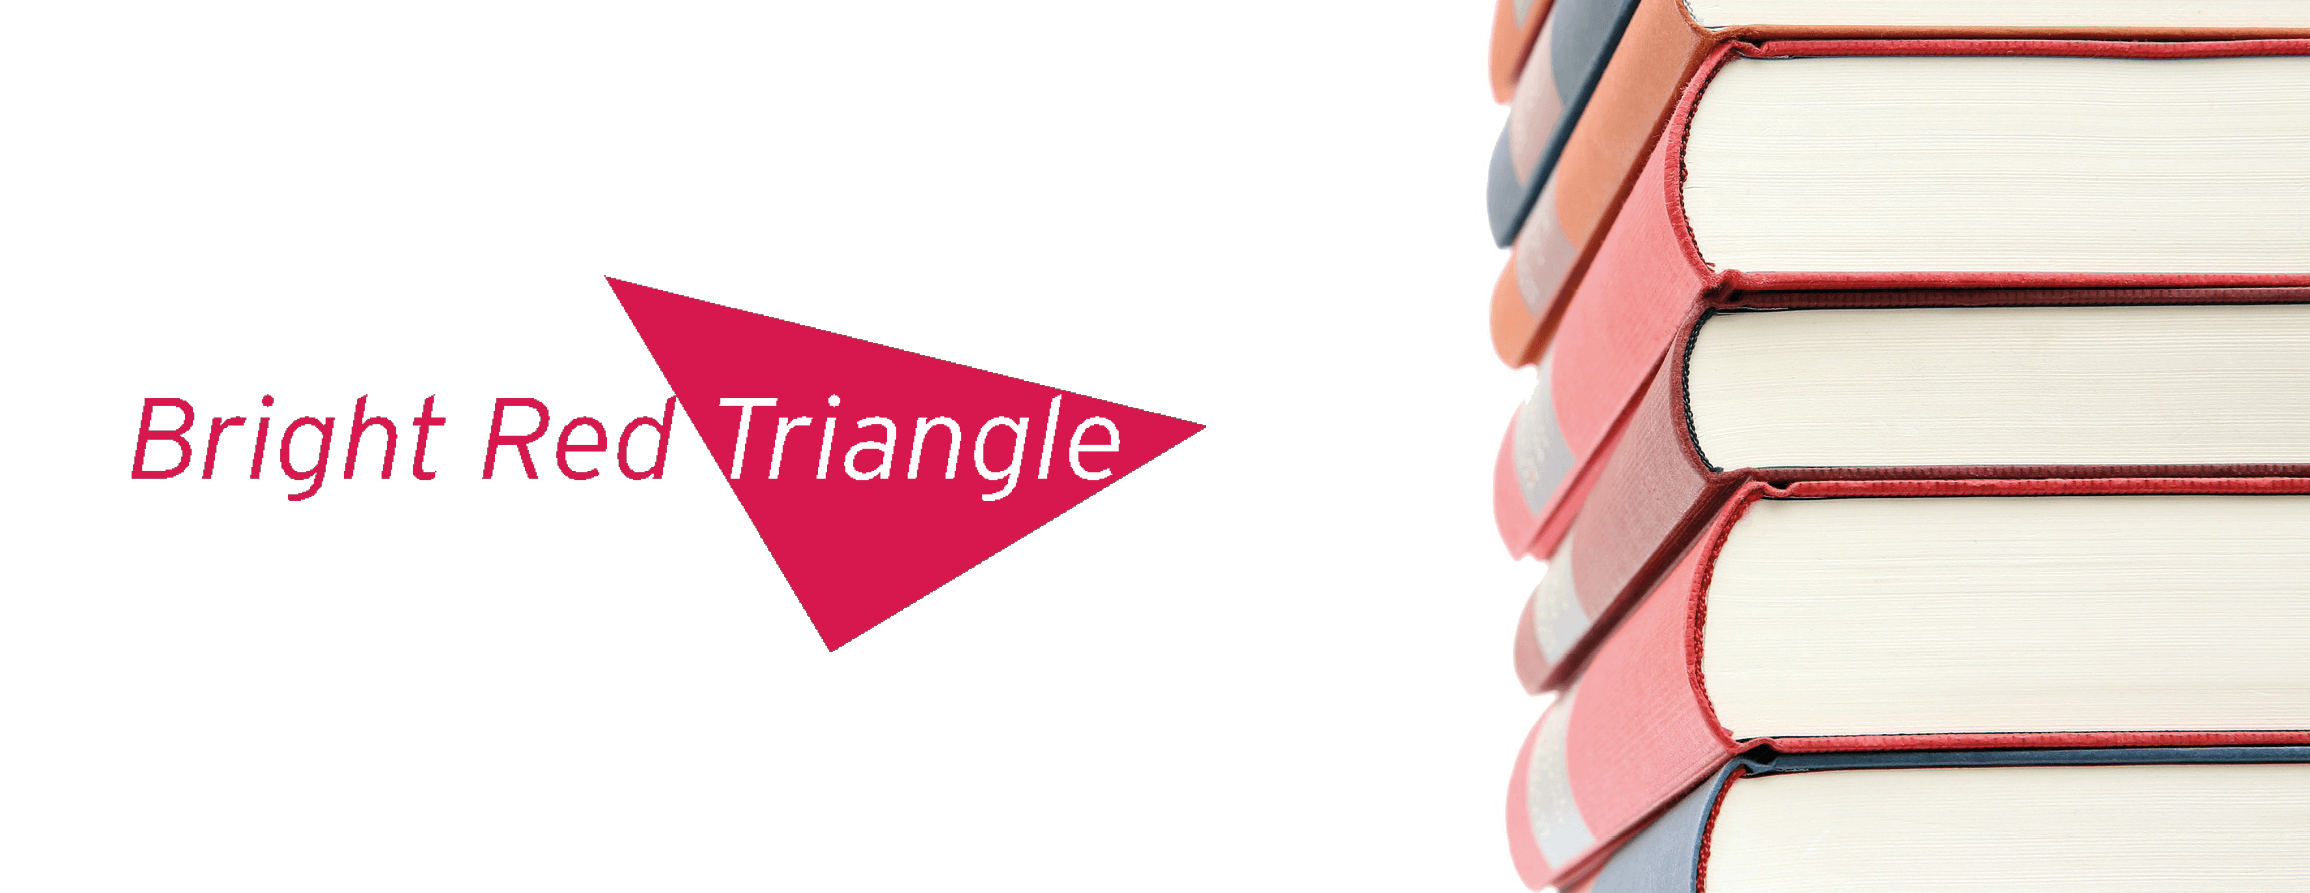 Red Triangle Logo - Facebook BRTBookClub CoverImage Red Triangle